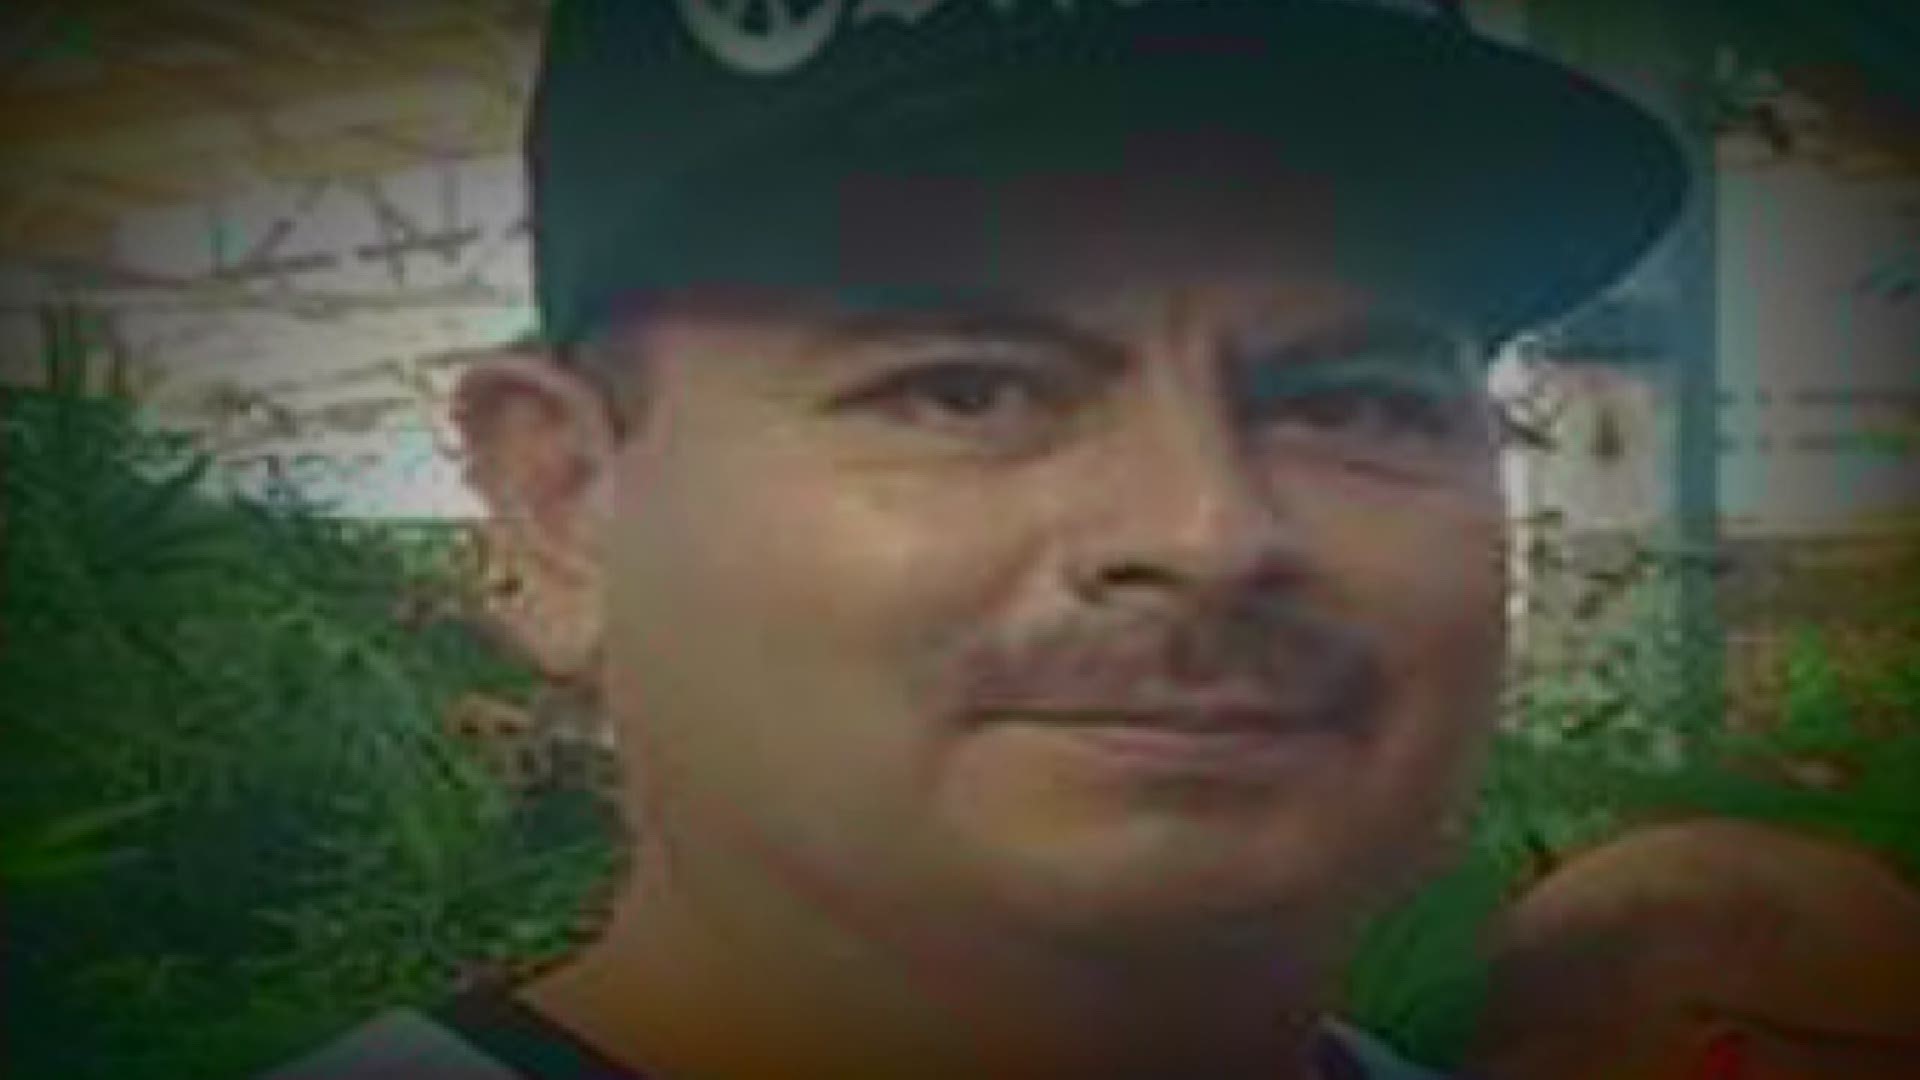 Silent Witness needs your help locating suspect, Ramon Mendez in connection in the attempted murder of his wife, Jesinia Valdez.